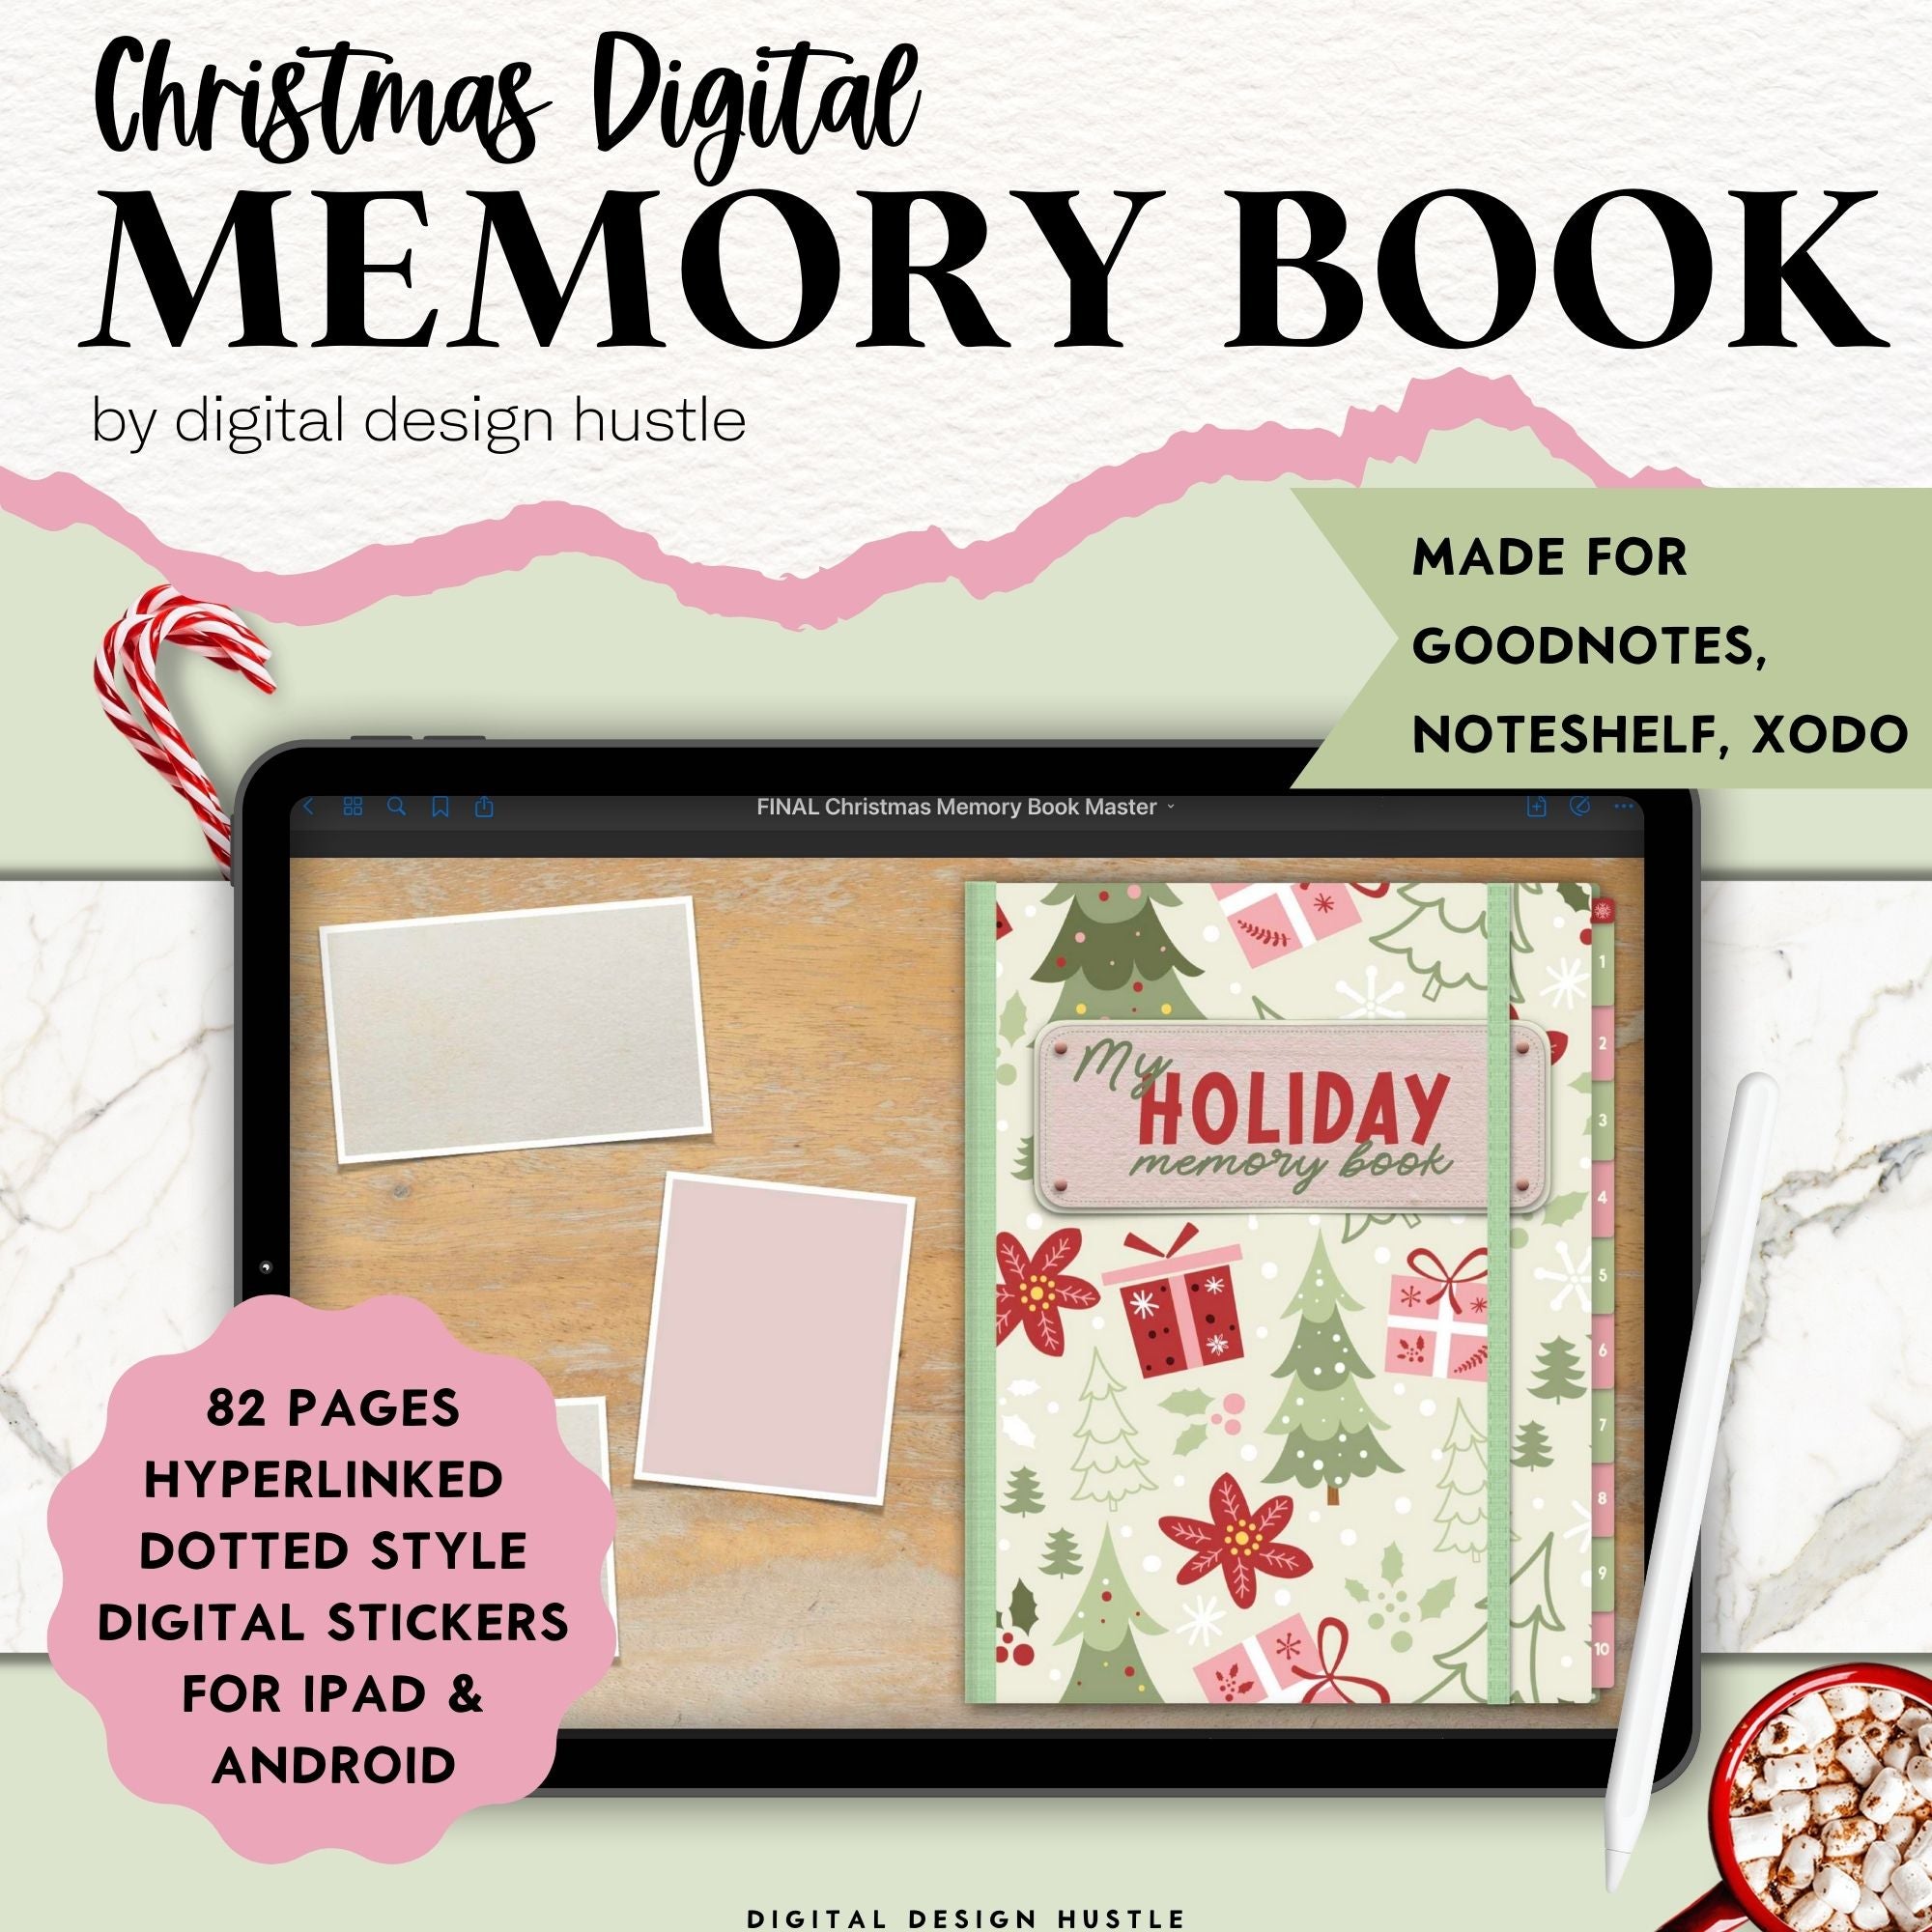 Record special family memories in the Digital Holiday Memory Book. Capture all your special holiday memories with family and friends in the 82-page digital journal. This is the perfect scrapbook to document family holidays.